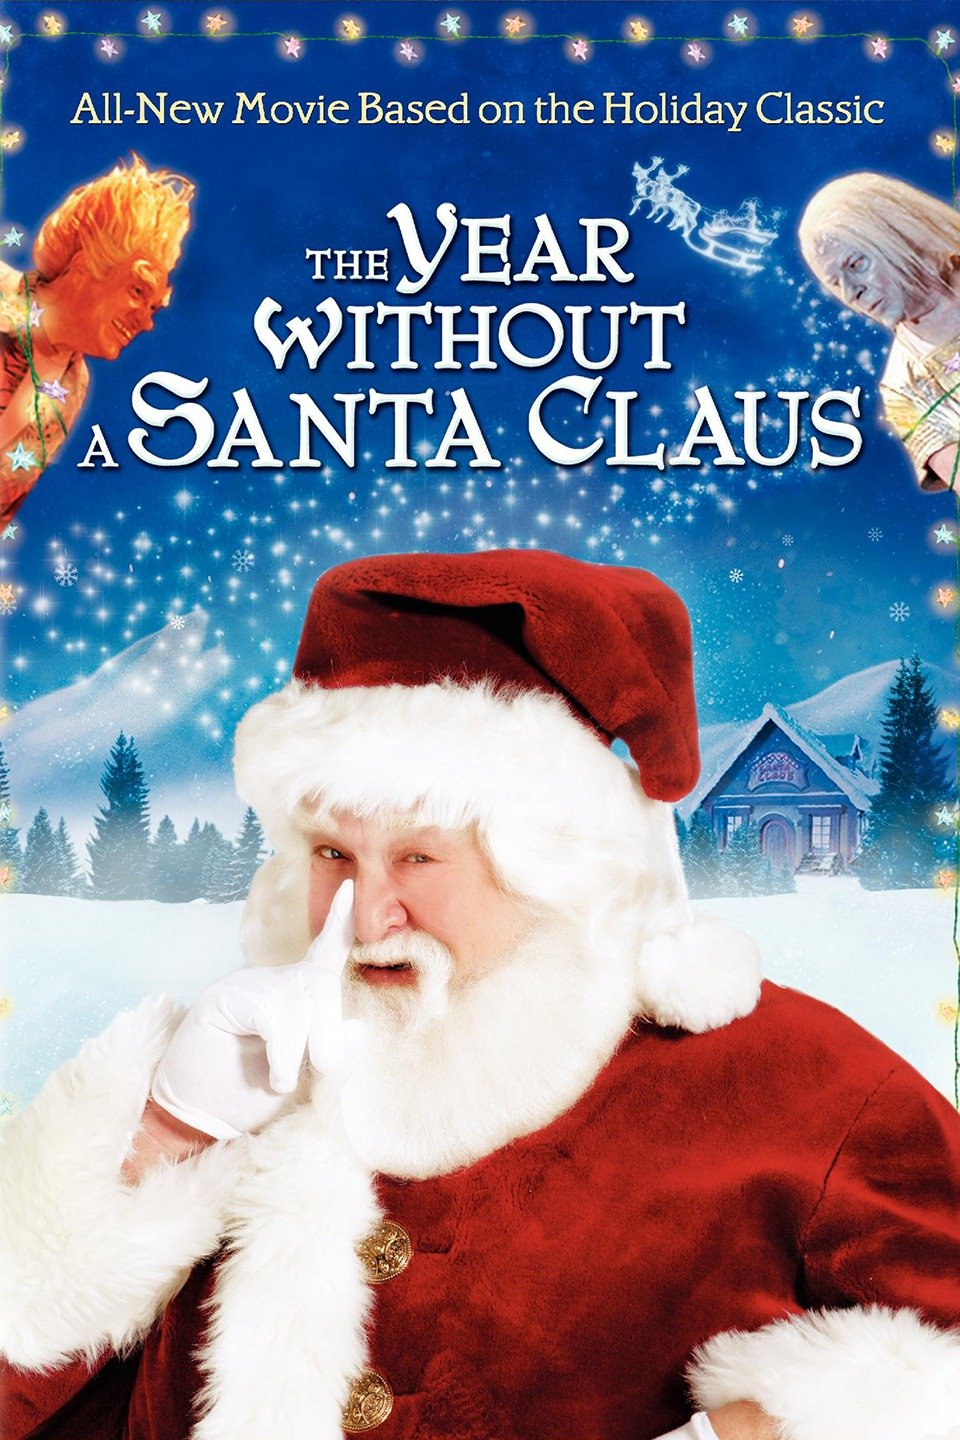 The Year Without a Santa Claus (2006) starring John Goodman on DVD on DVD